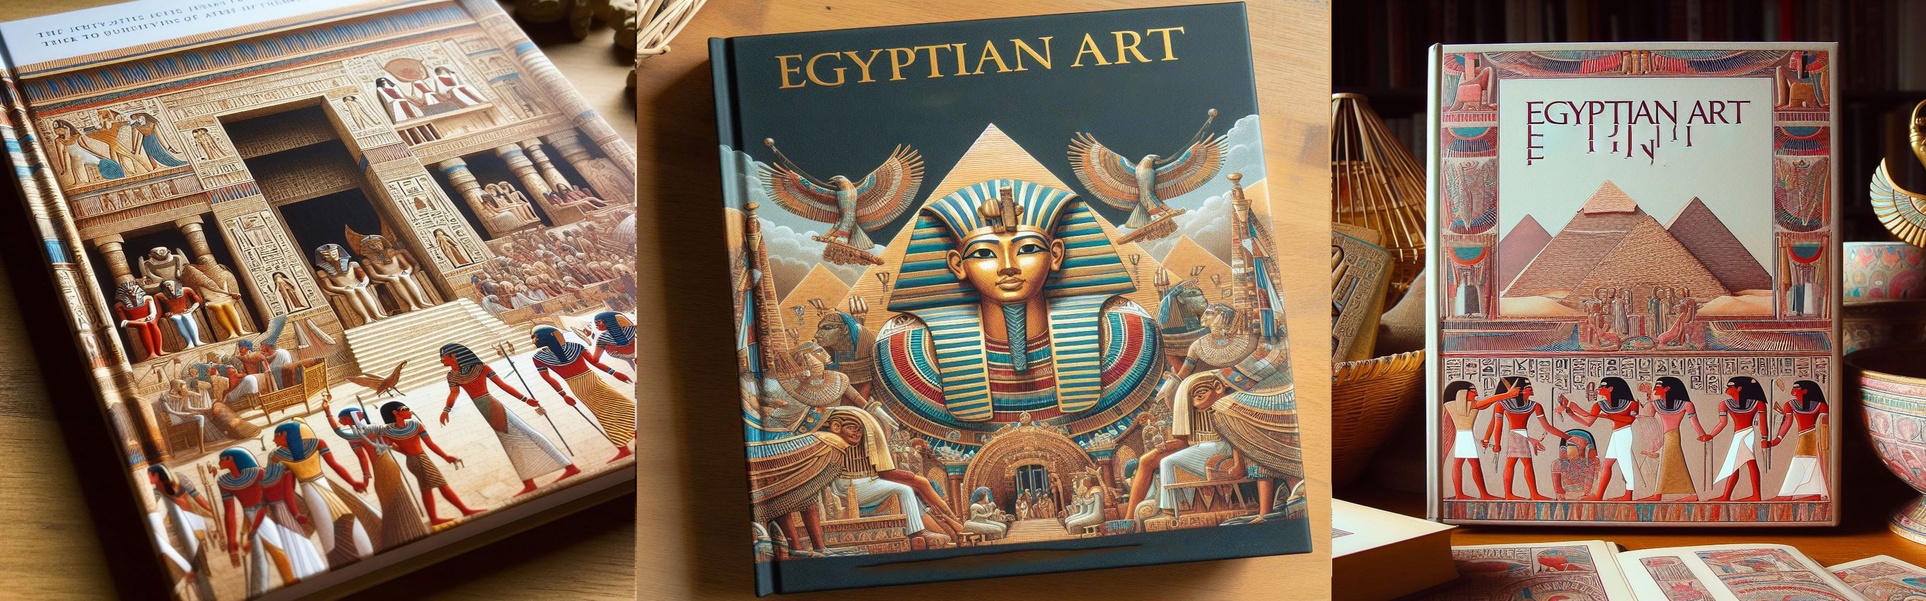 Book:Egyptian Art in the Age of the Pyramids